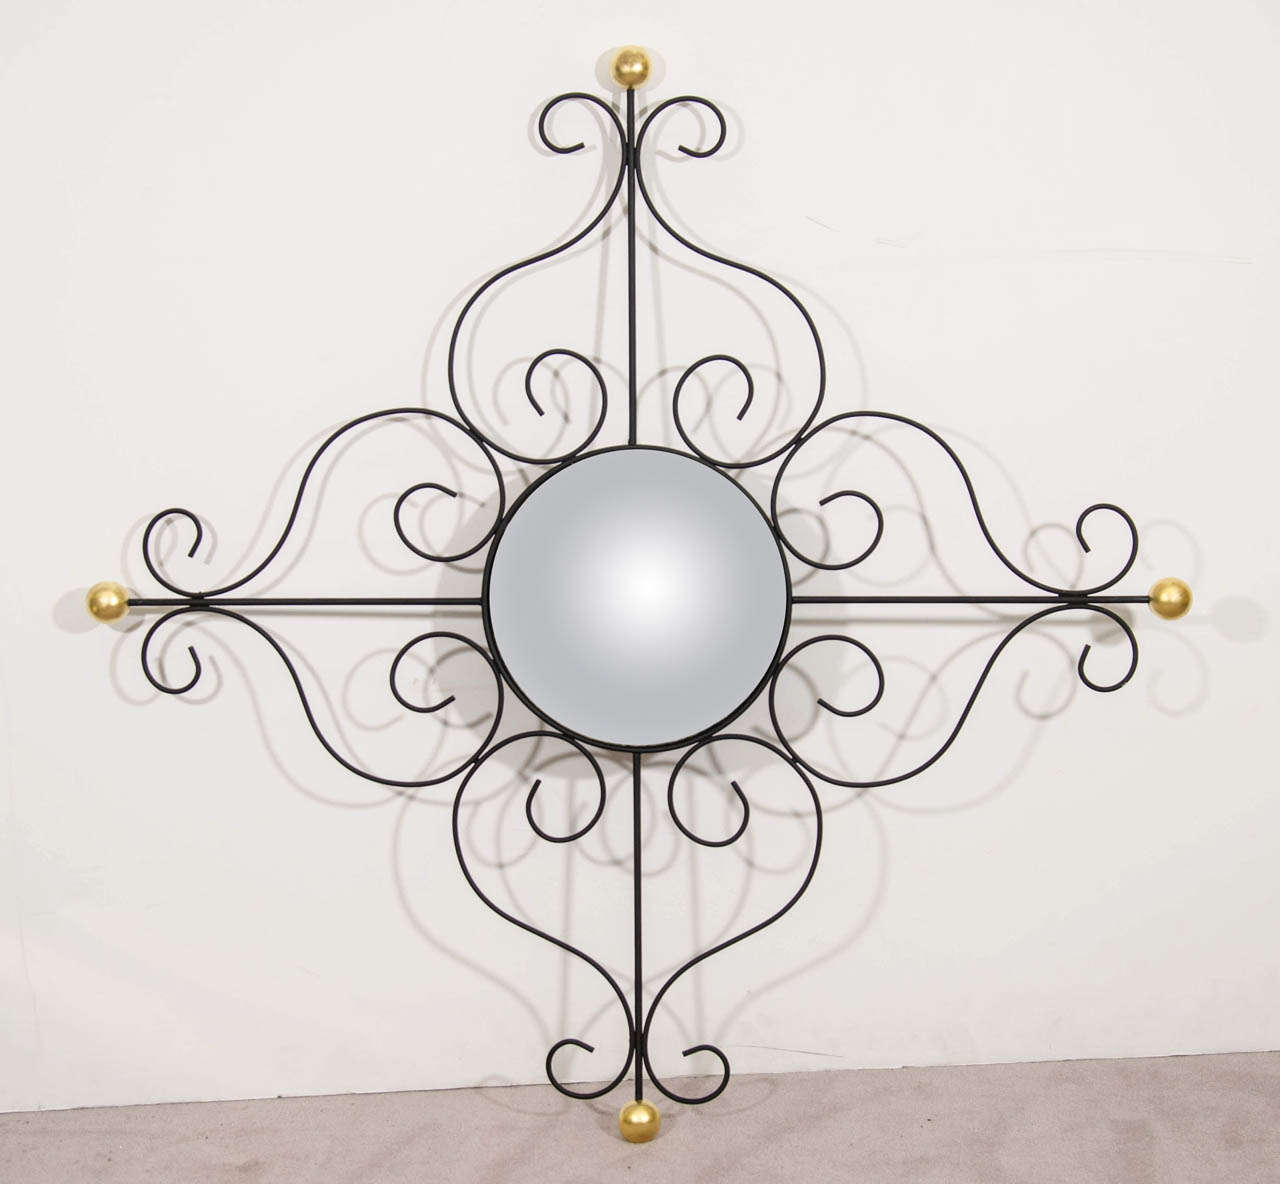 A vintage convex wall mirror with black scrolled iron frame in French modern style with 18-karat gold leaf ball accents.